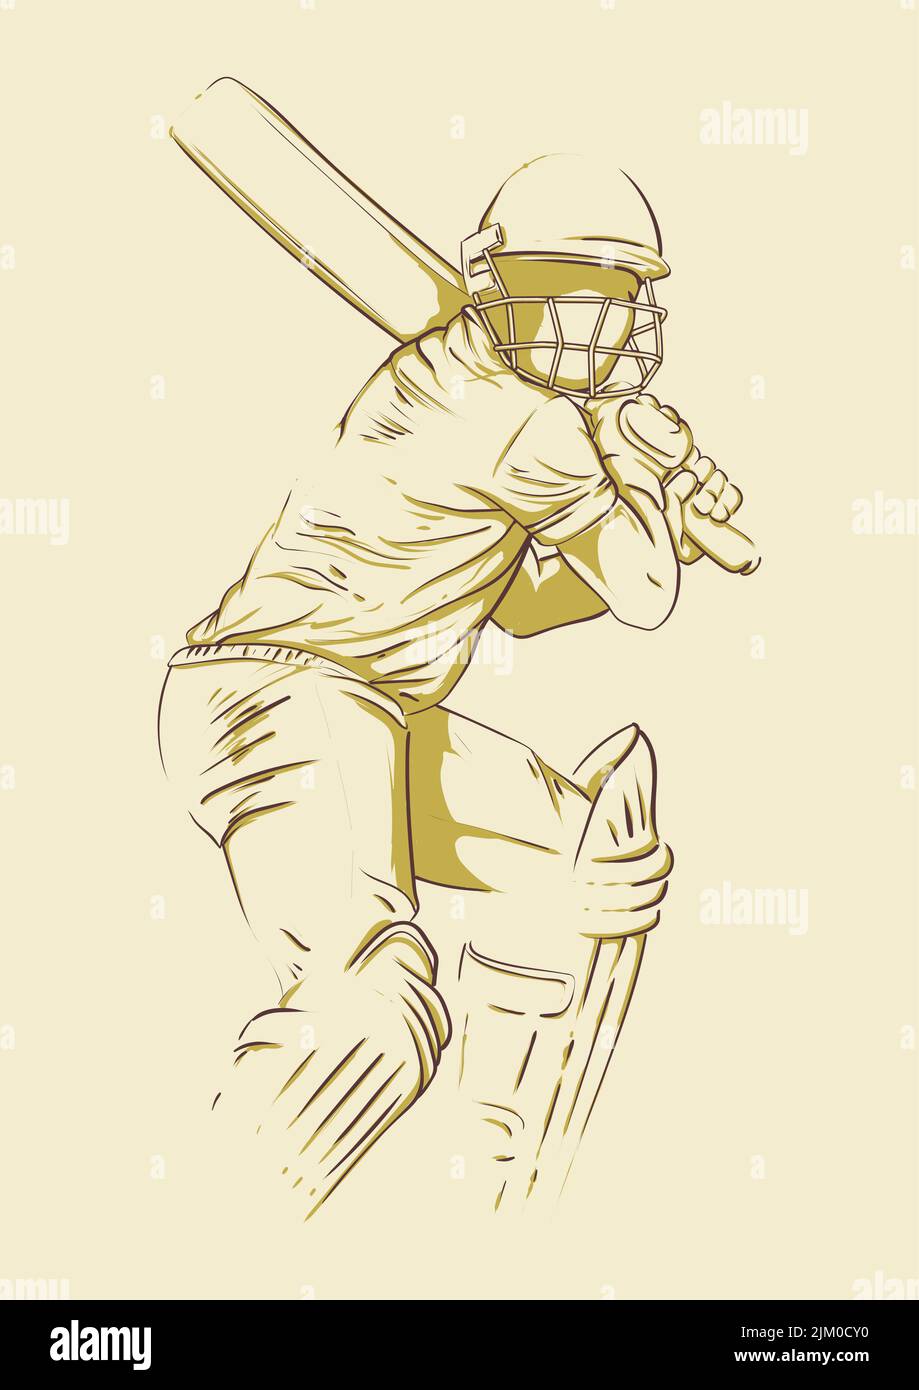 cricket player batsman ready to hit the ball. unfinished hand drawing sketch style vector illustration. for announcement poster, presentation and adve Stock Vector